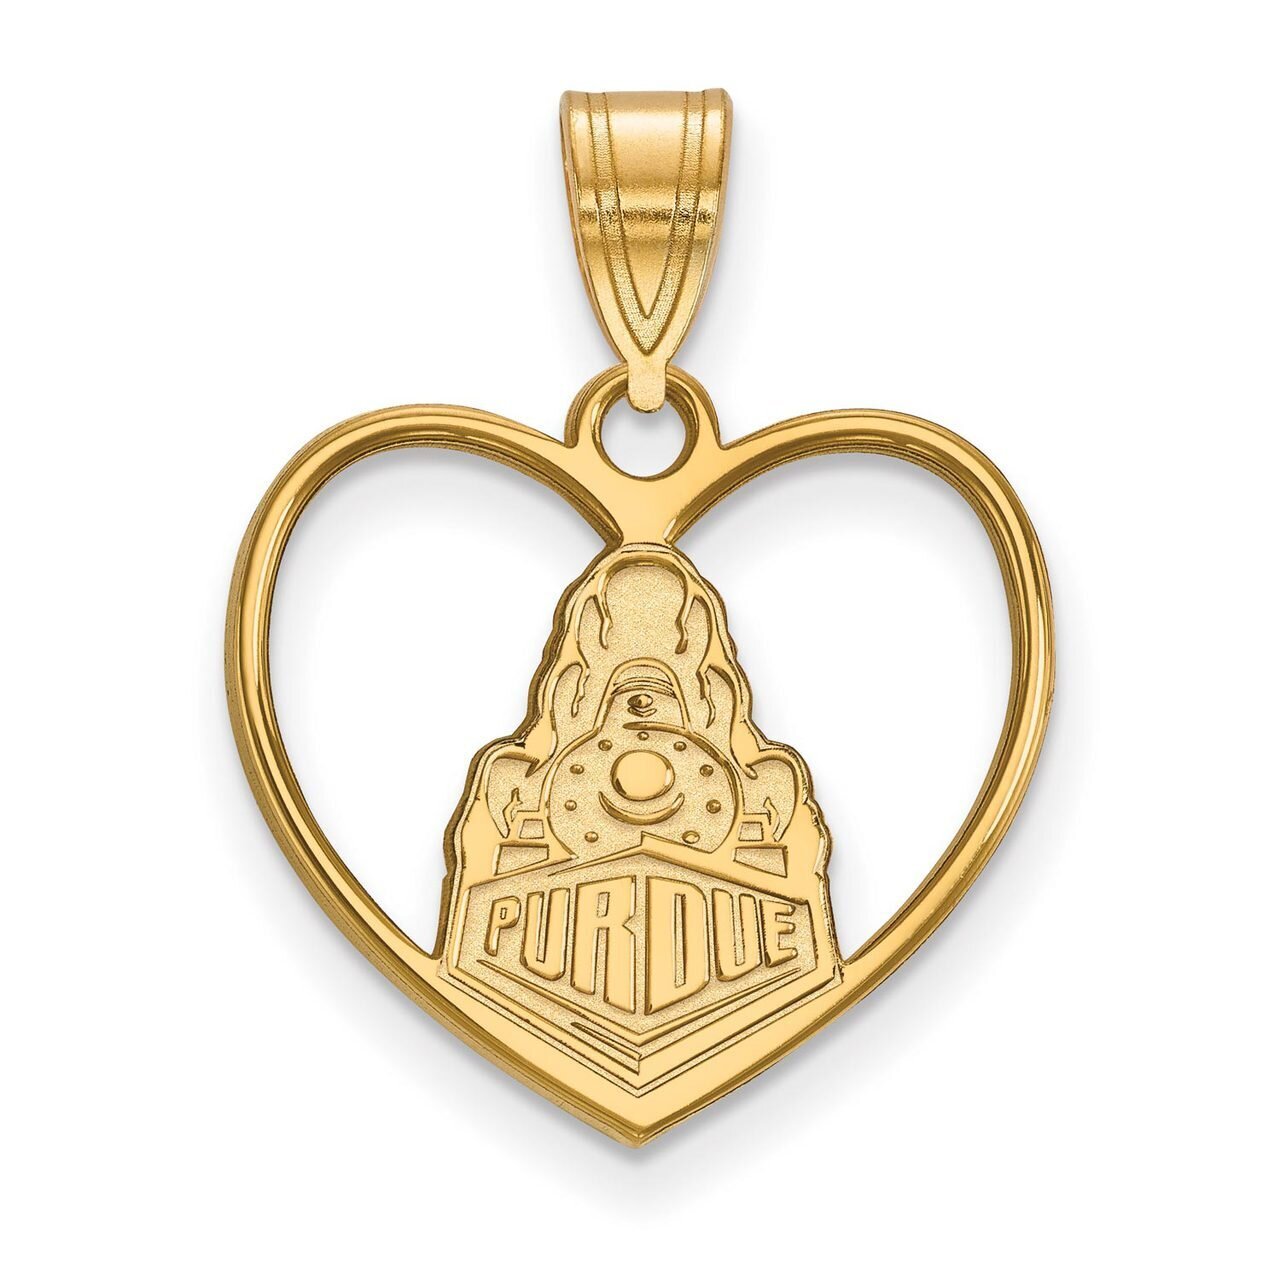 Purdue Pendant in Heart Gold-plated Silver GP052PU